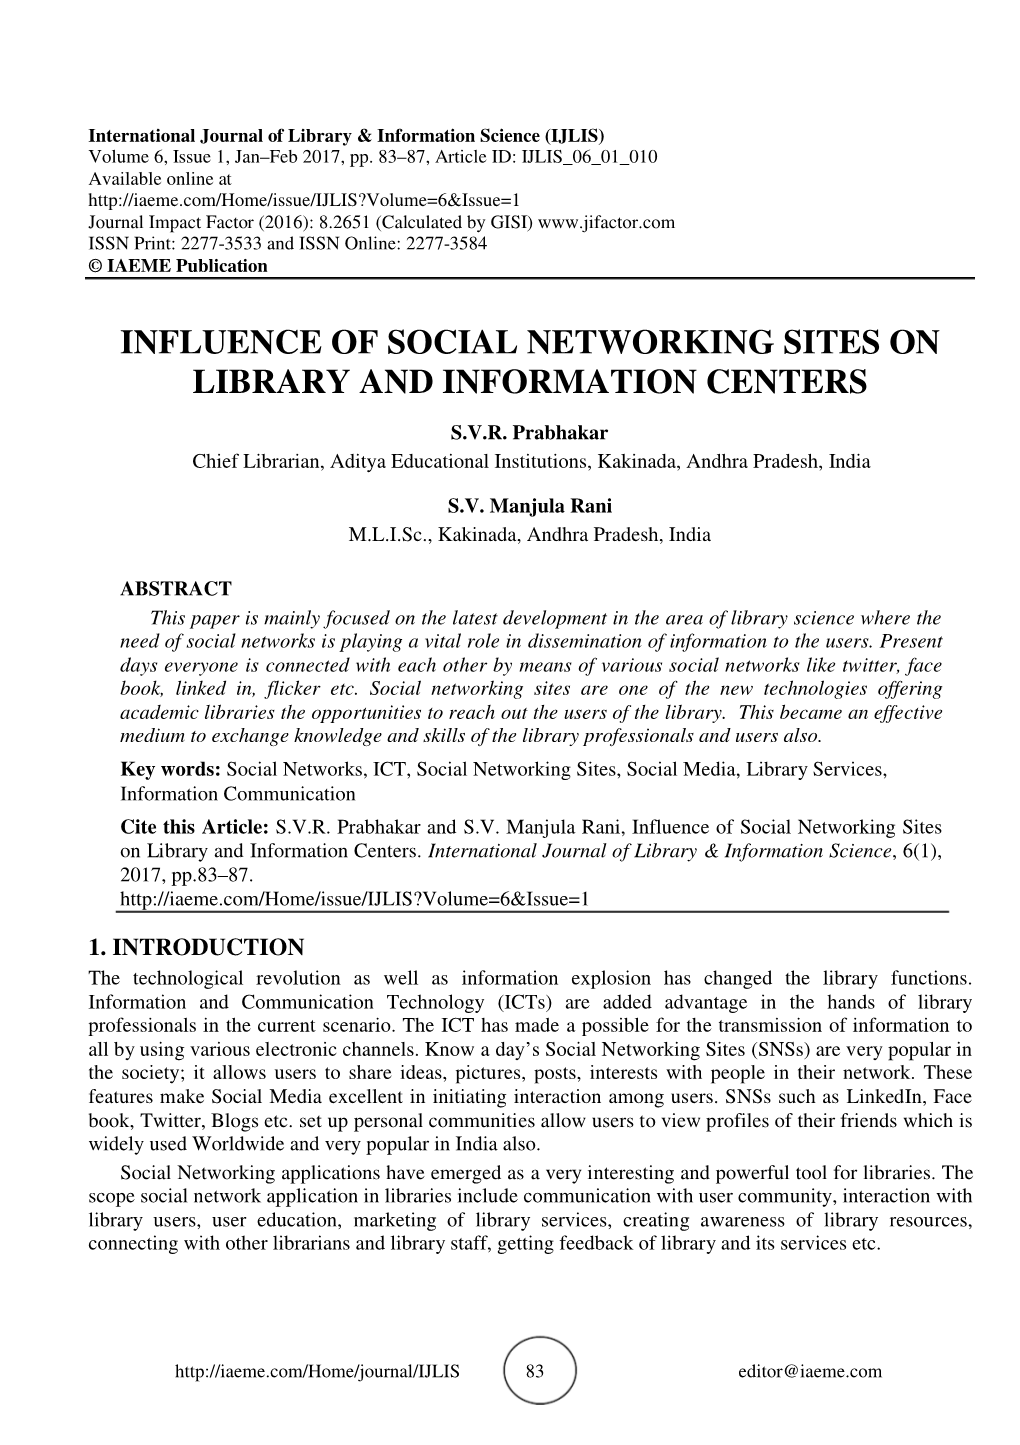 Influence of Social Networking Sites on Library and Information Centers